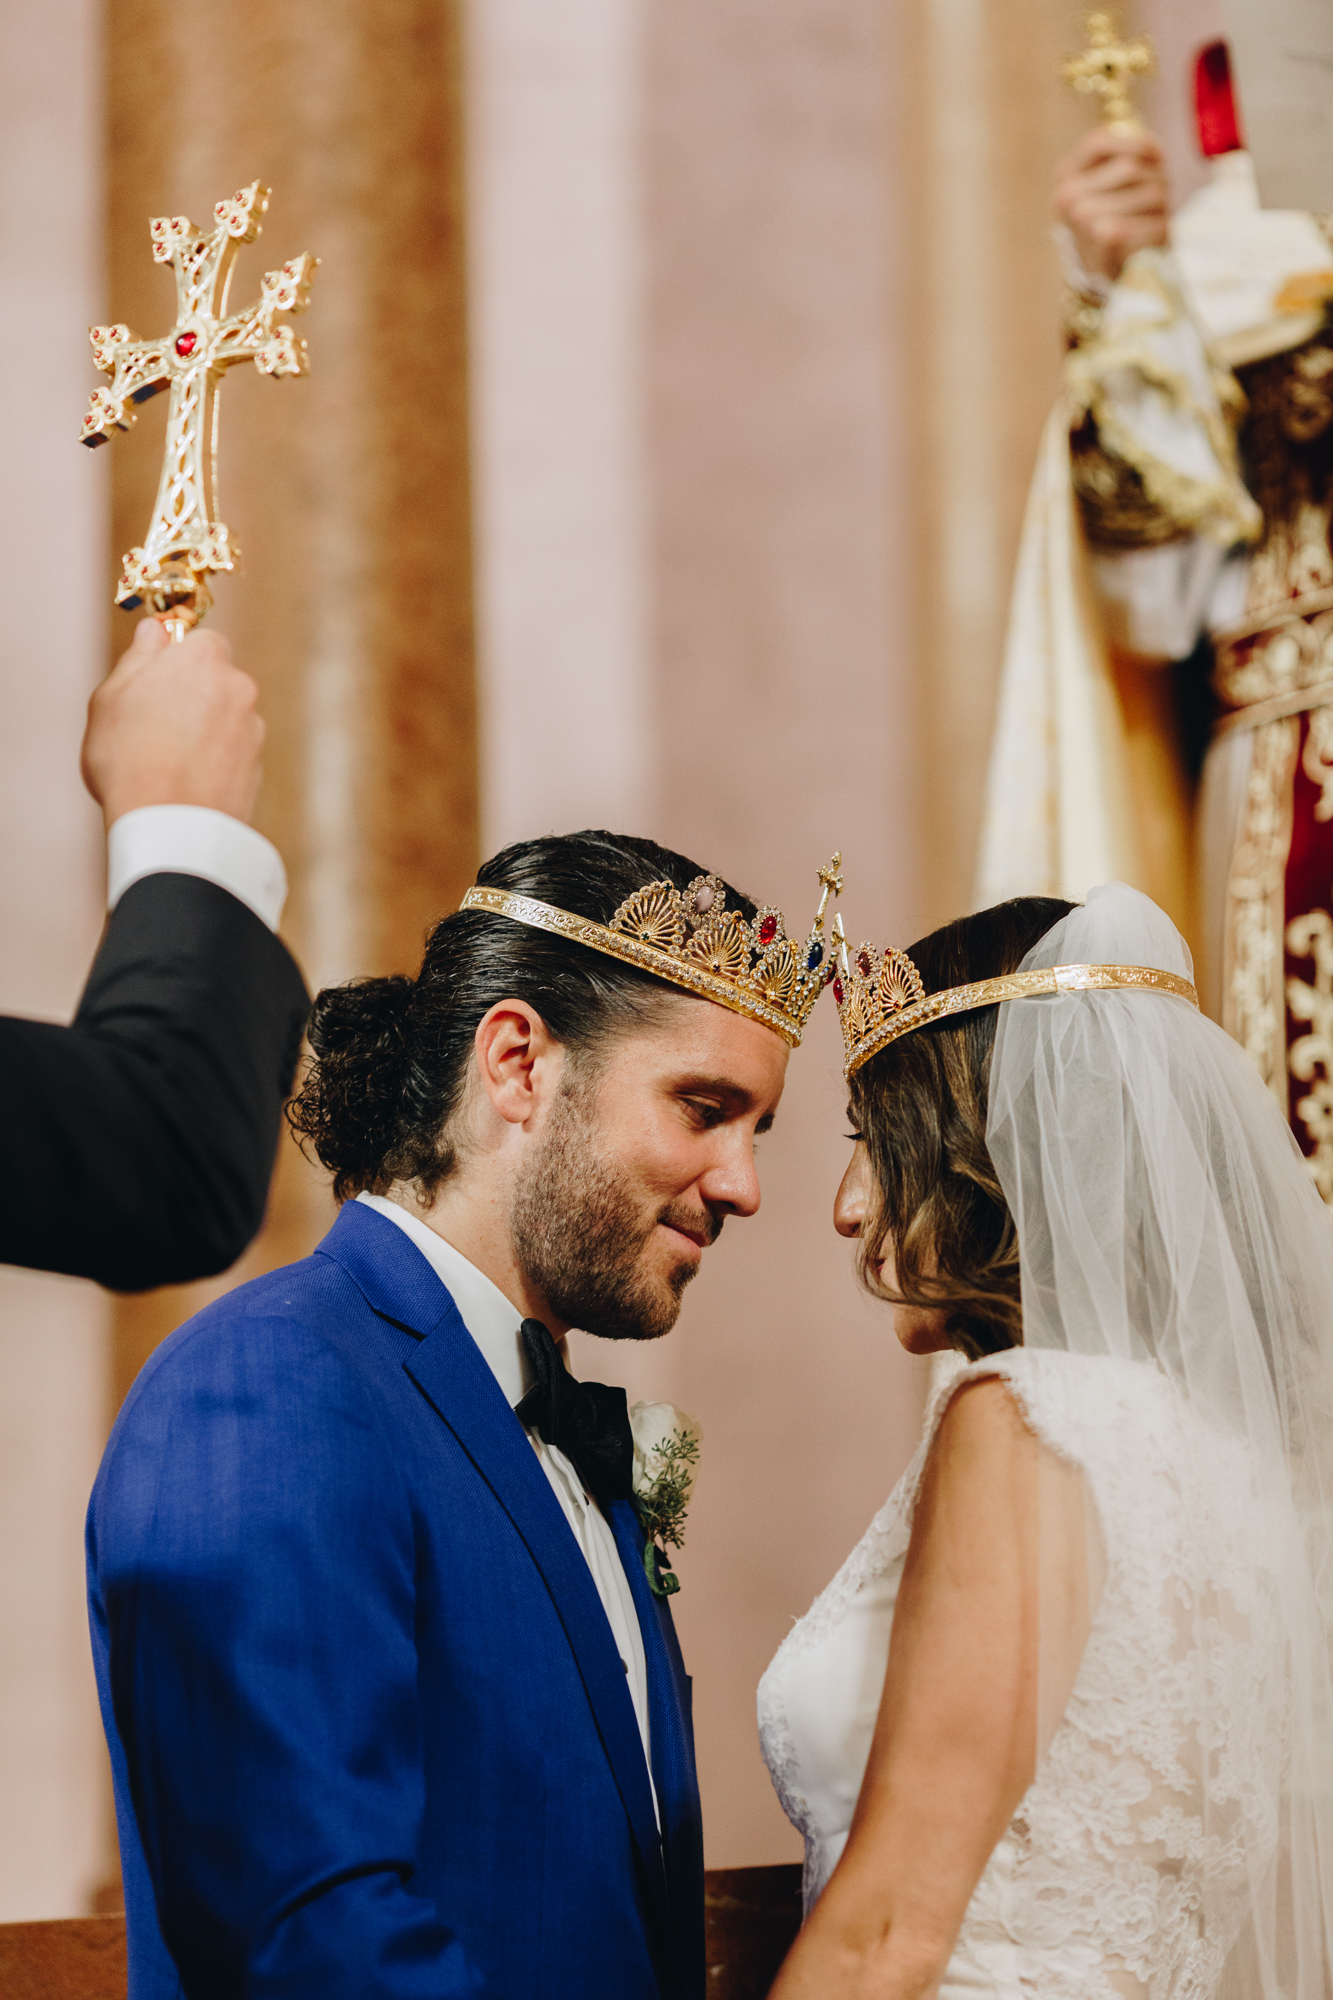 Crowning ceremony at Armenian Church in New York